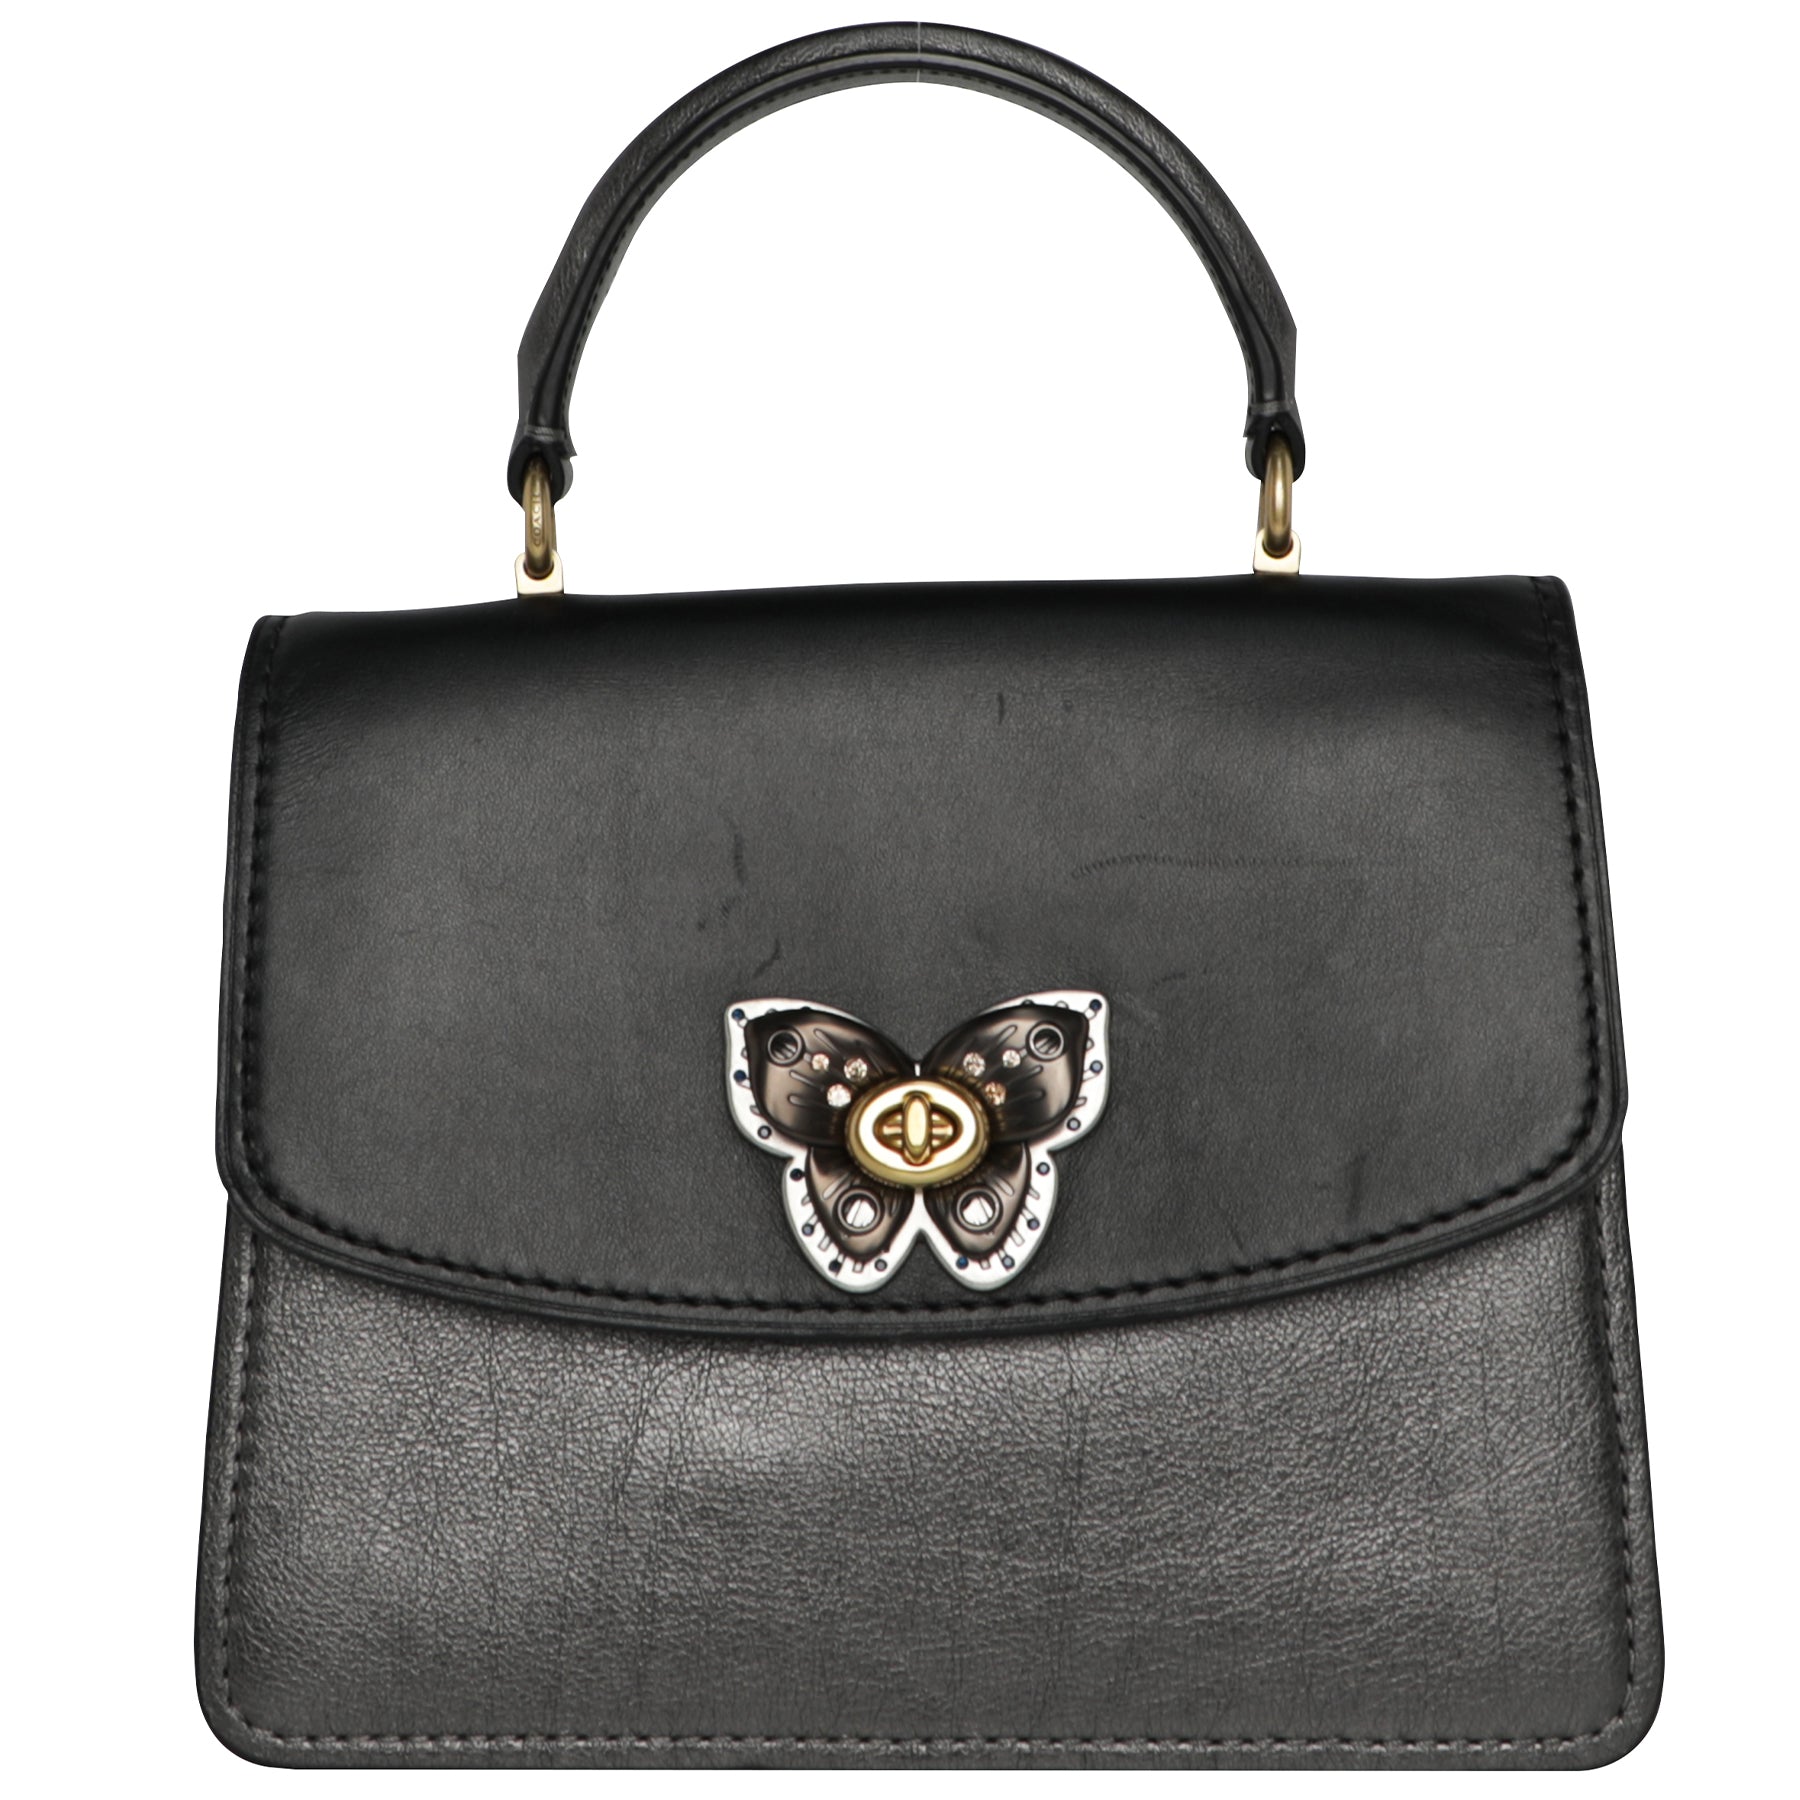 Vintage Coach Purse Makeover: Transforming a Timeless Classic